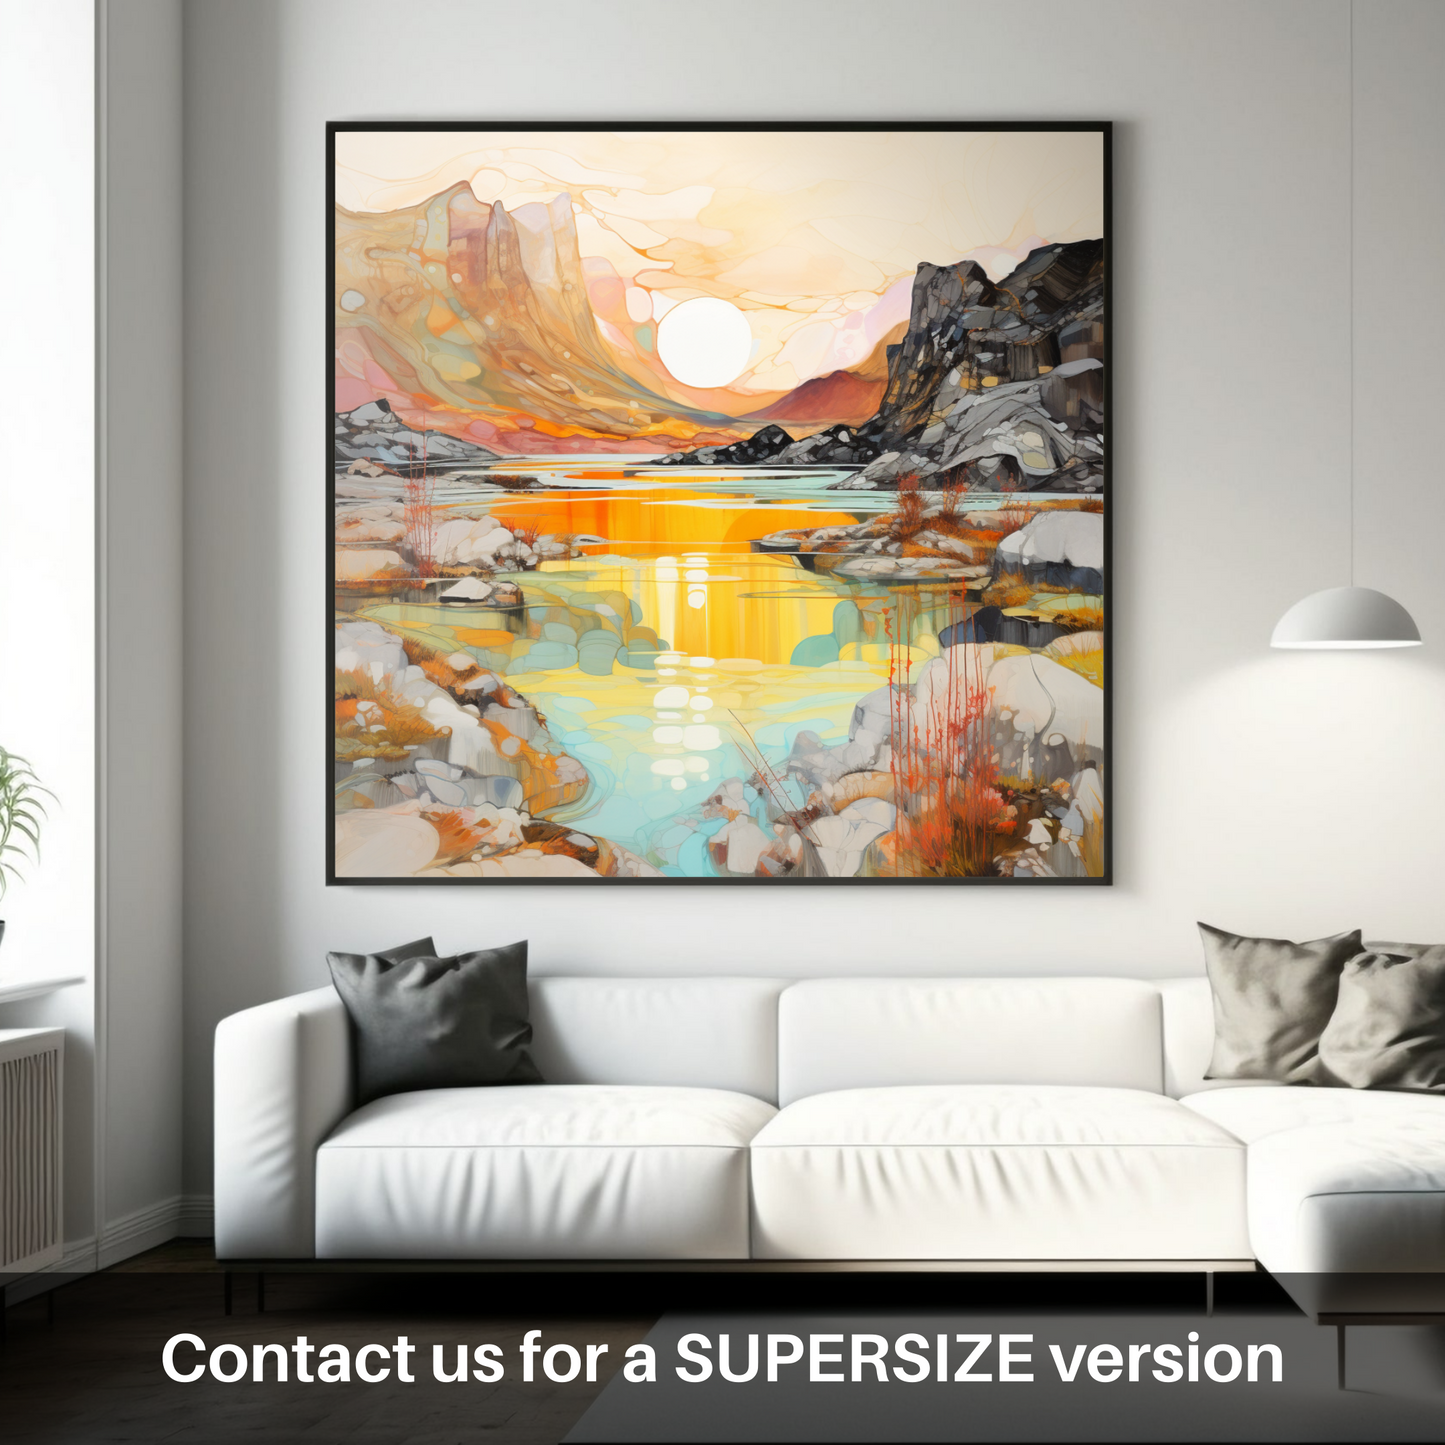 Huge supersize print of Isle of Skye Fairy Pools at golden hour in summer